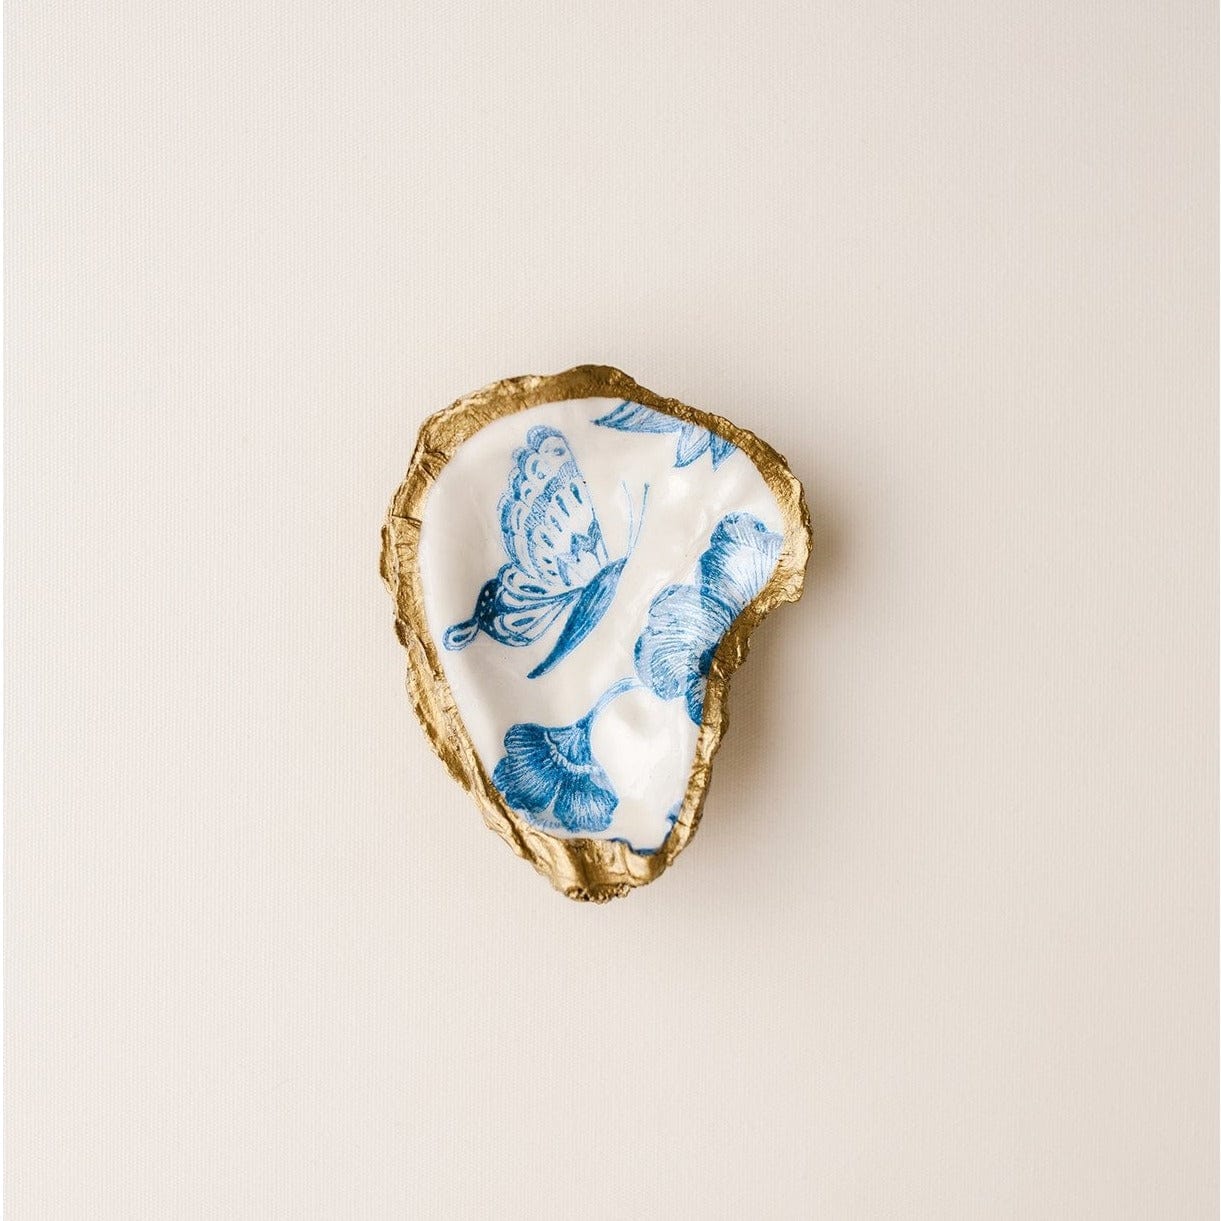 GIFT Indigo Decoupage Oyster Ring Dish - Butterfly